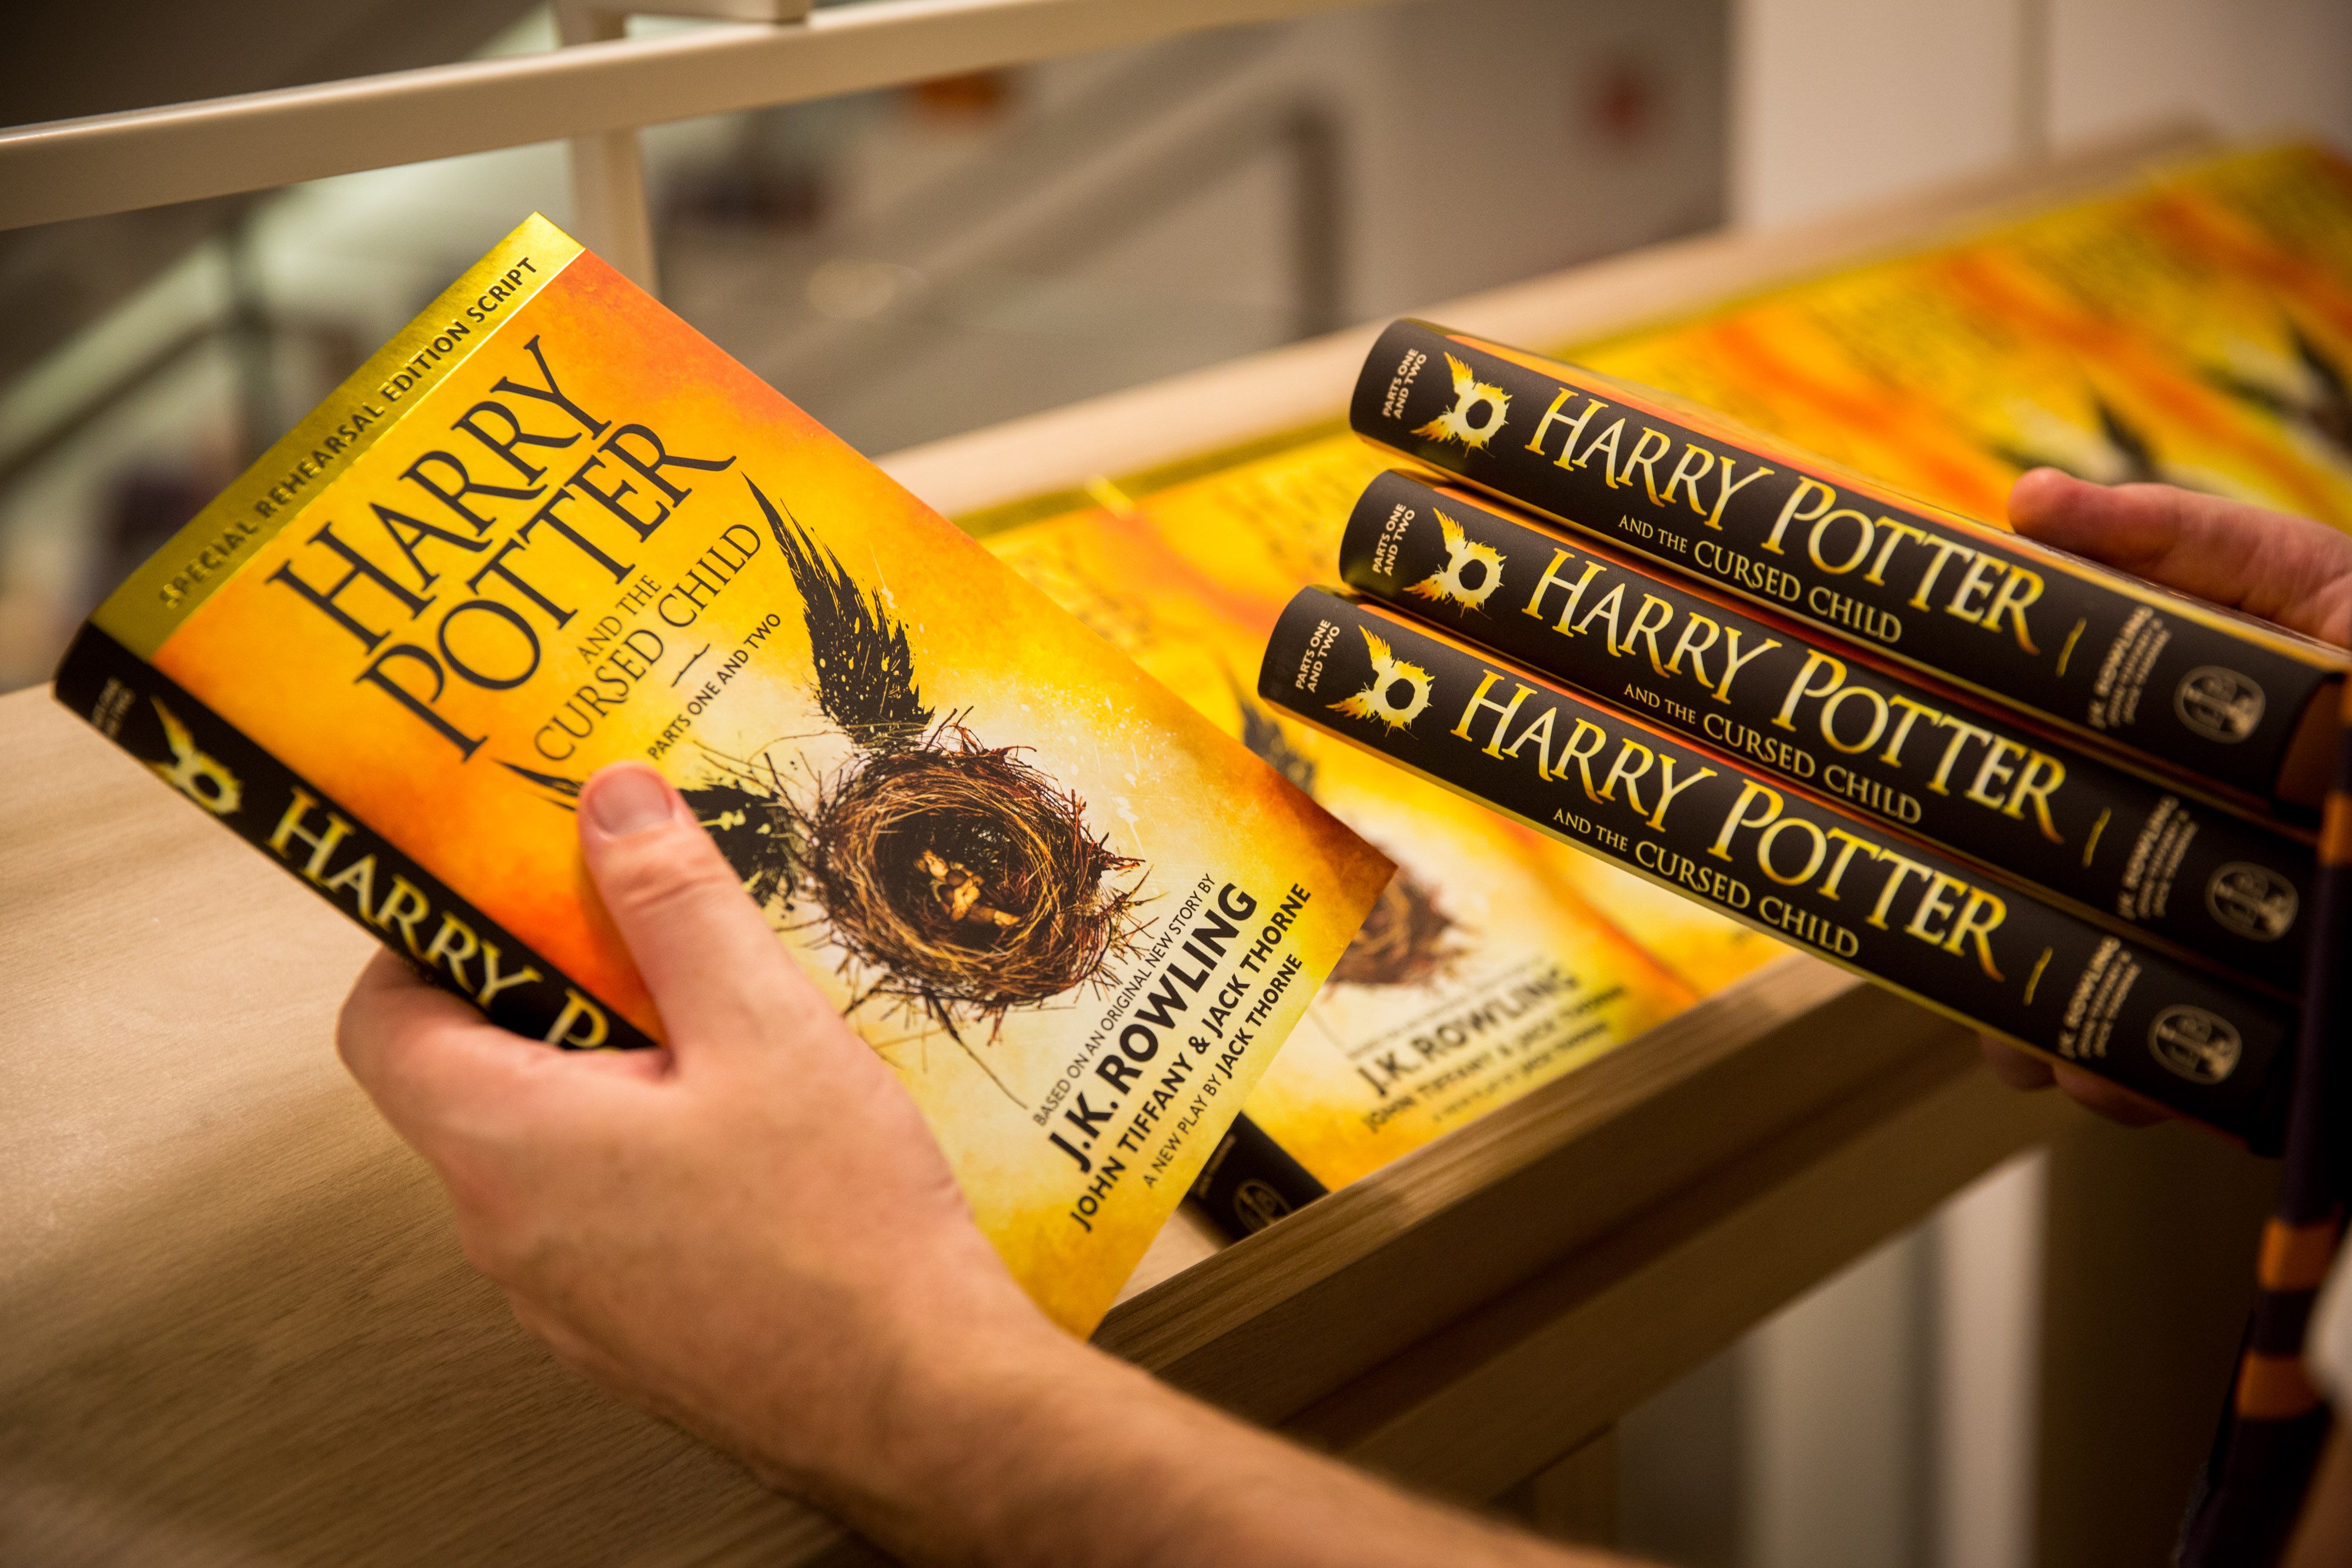 harry potter and the cursed child book price